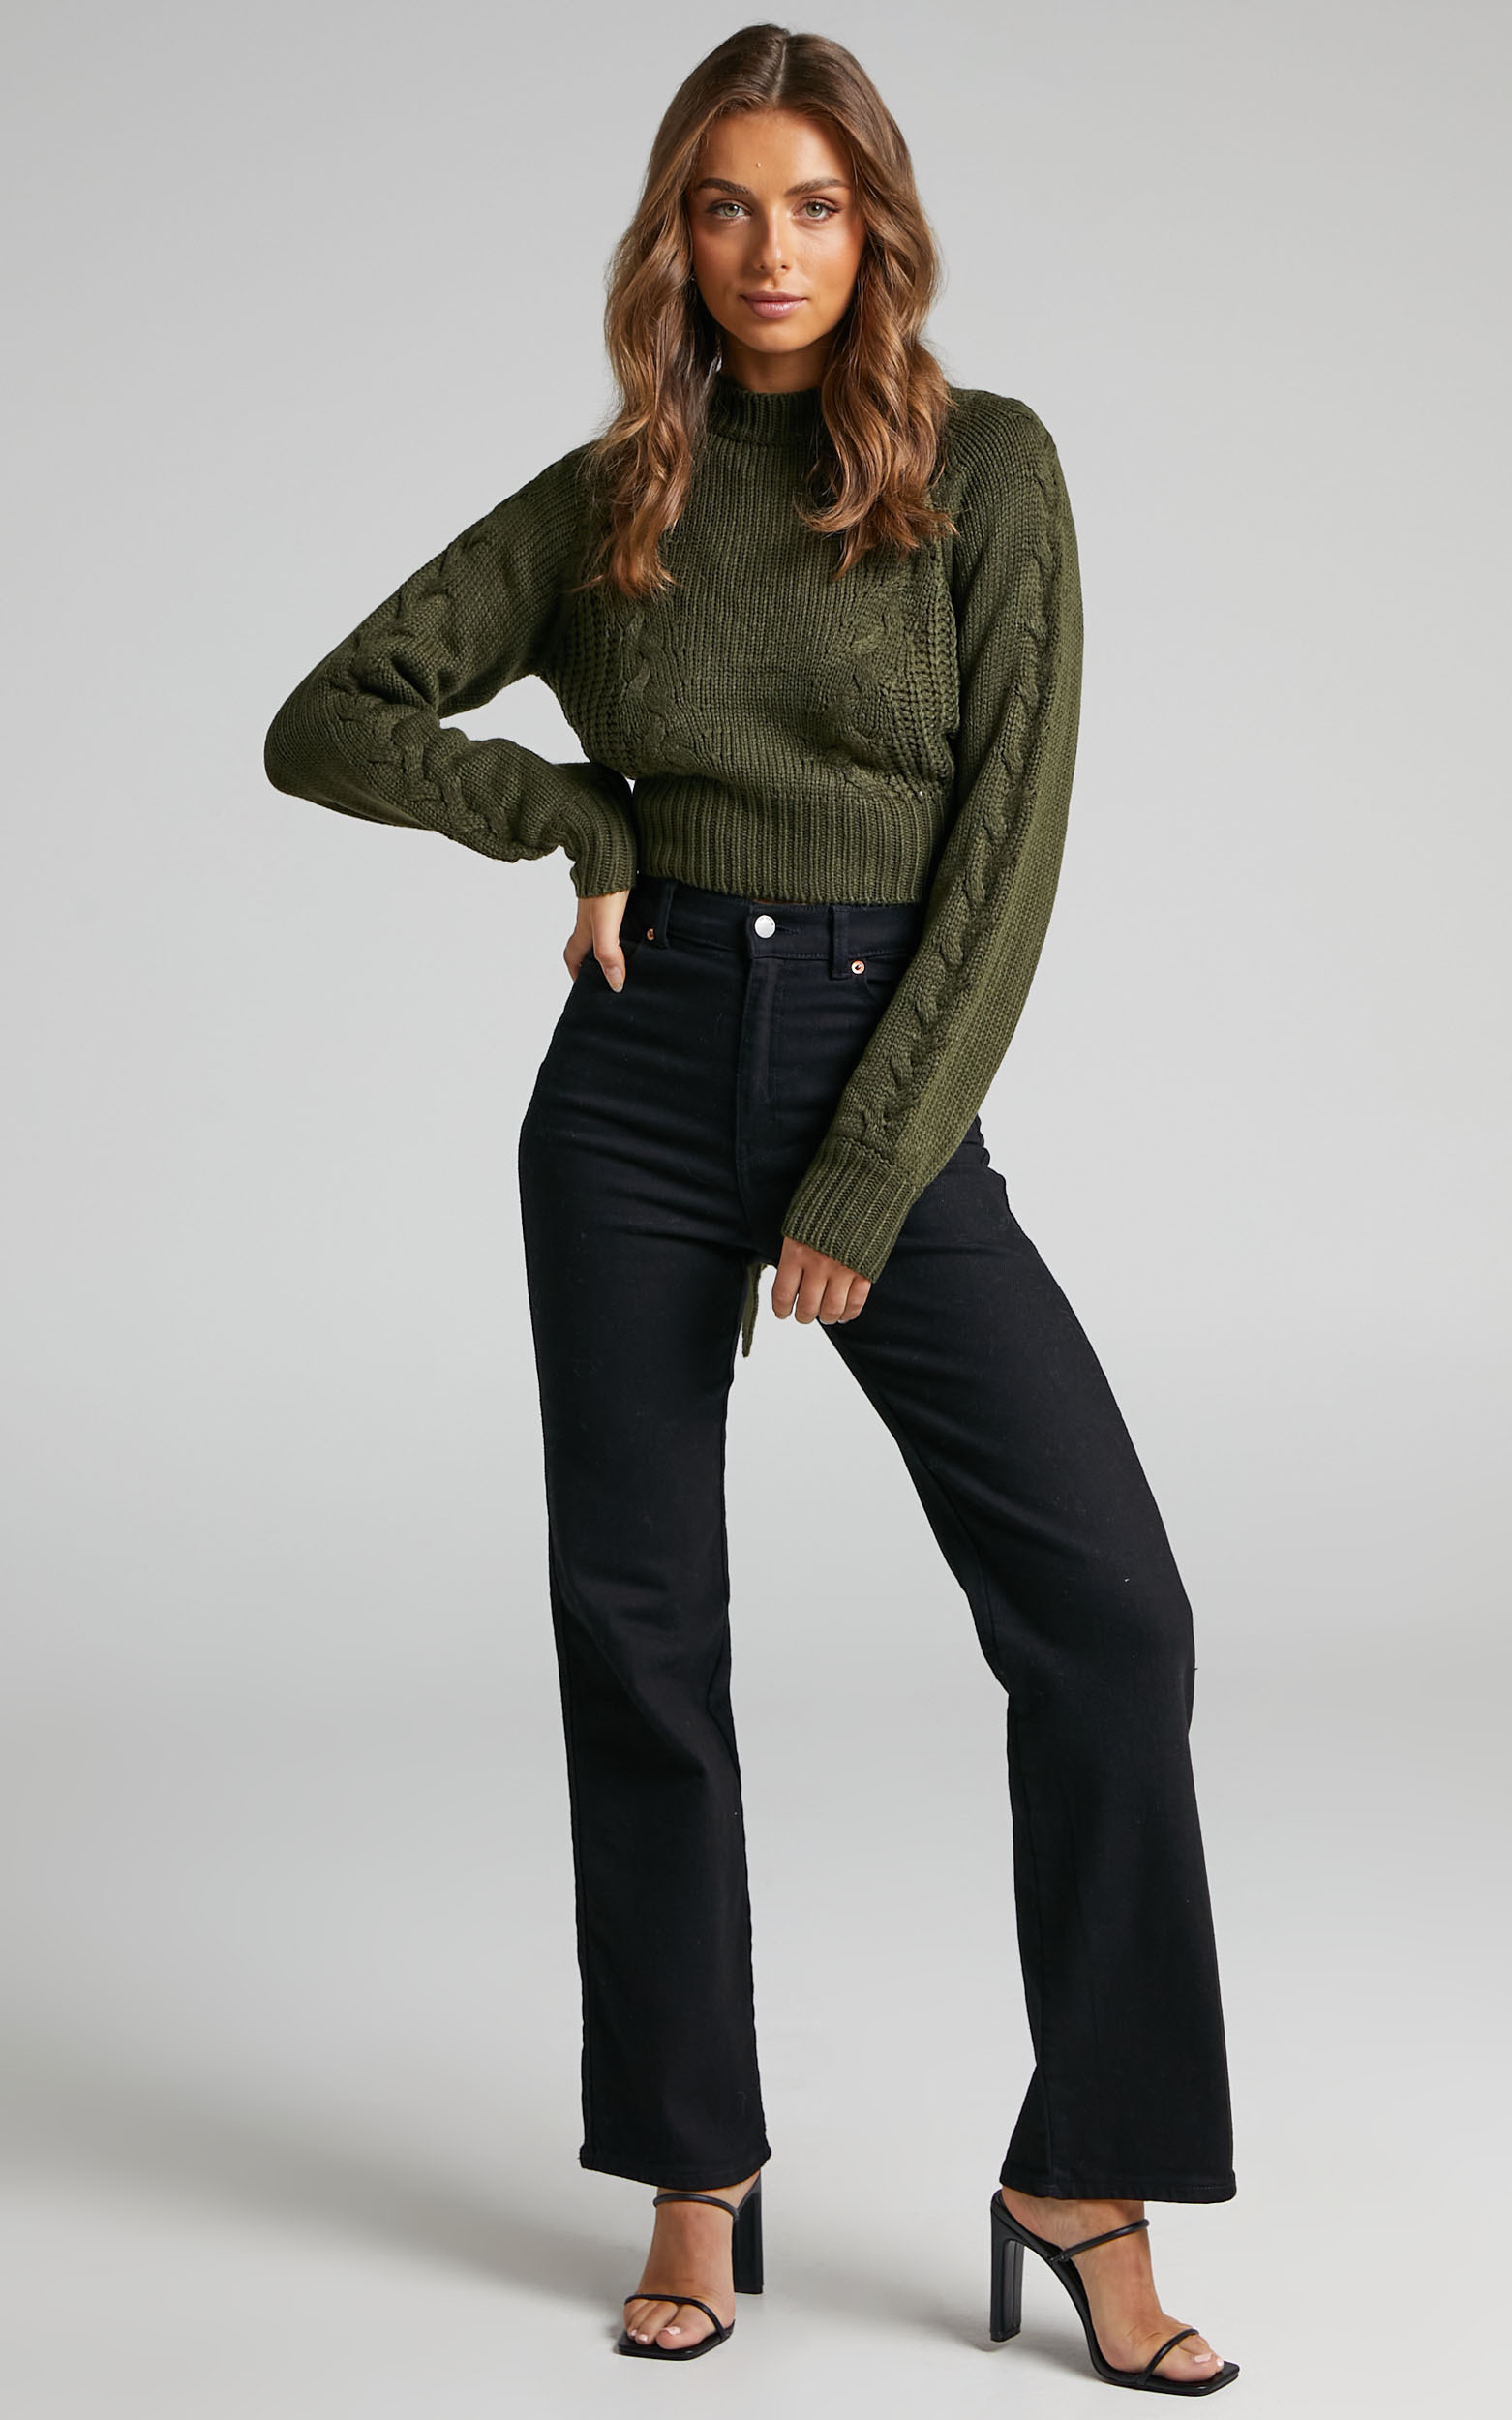 Maue long sleeve open back knit top in Khaki - 06, GRN1, hi-res image number null